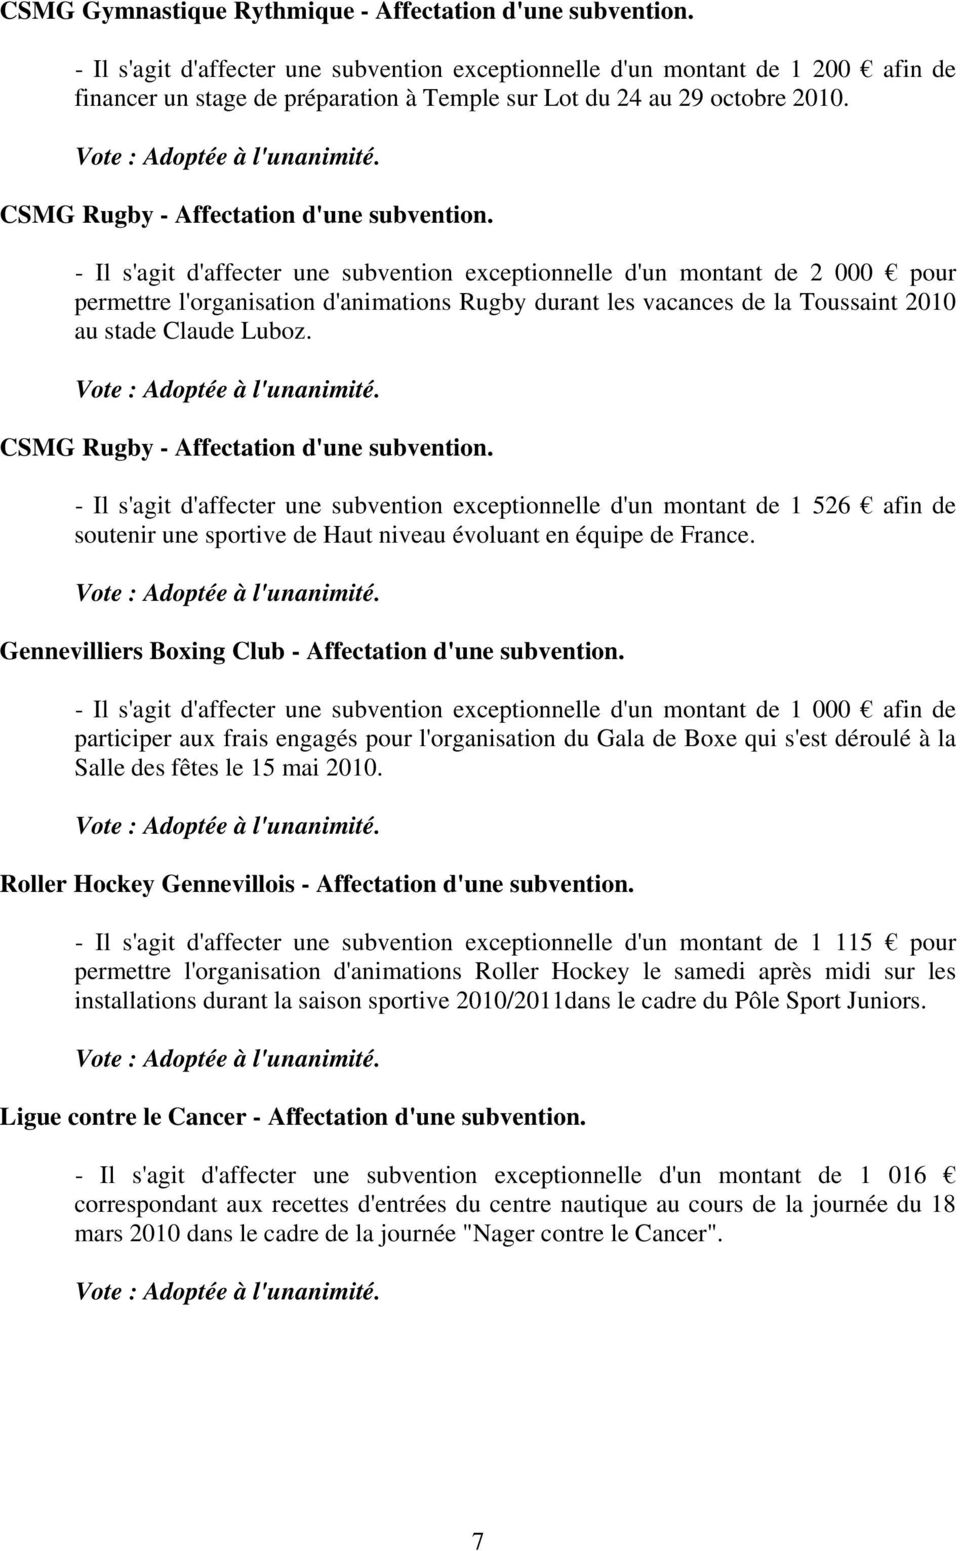 CSMG Rugby - Affectation d'une subvention.